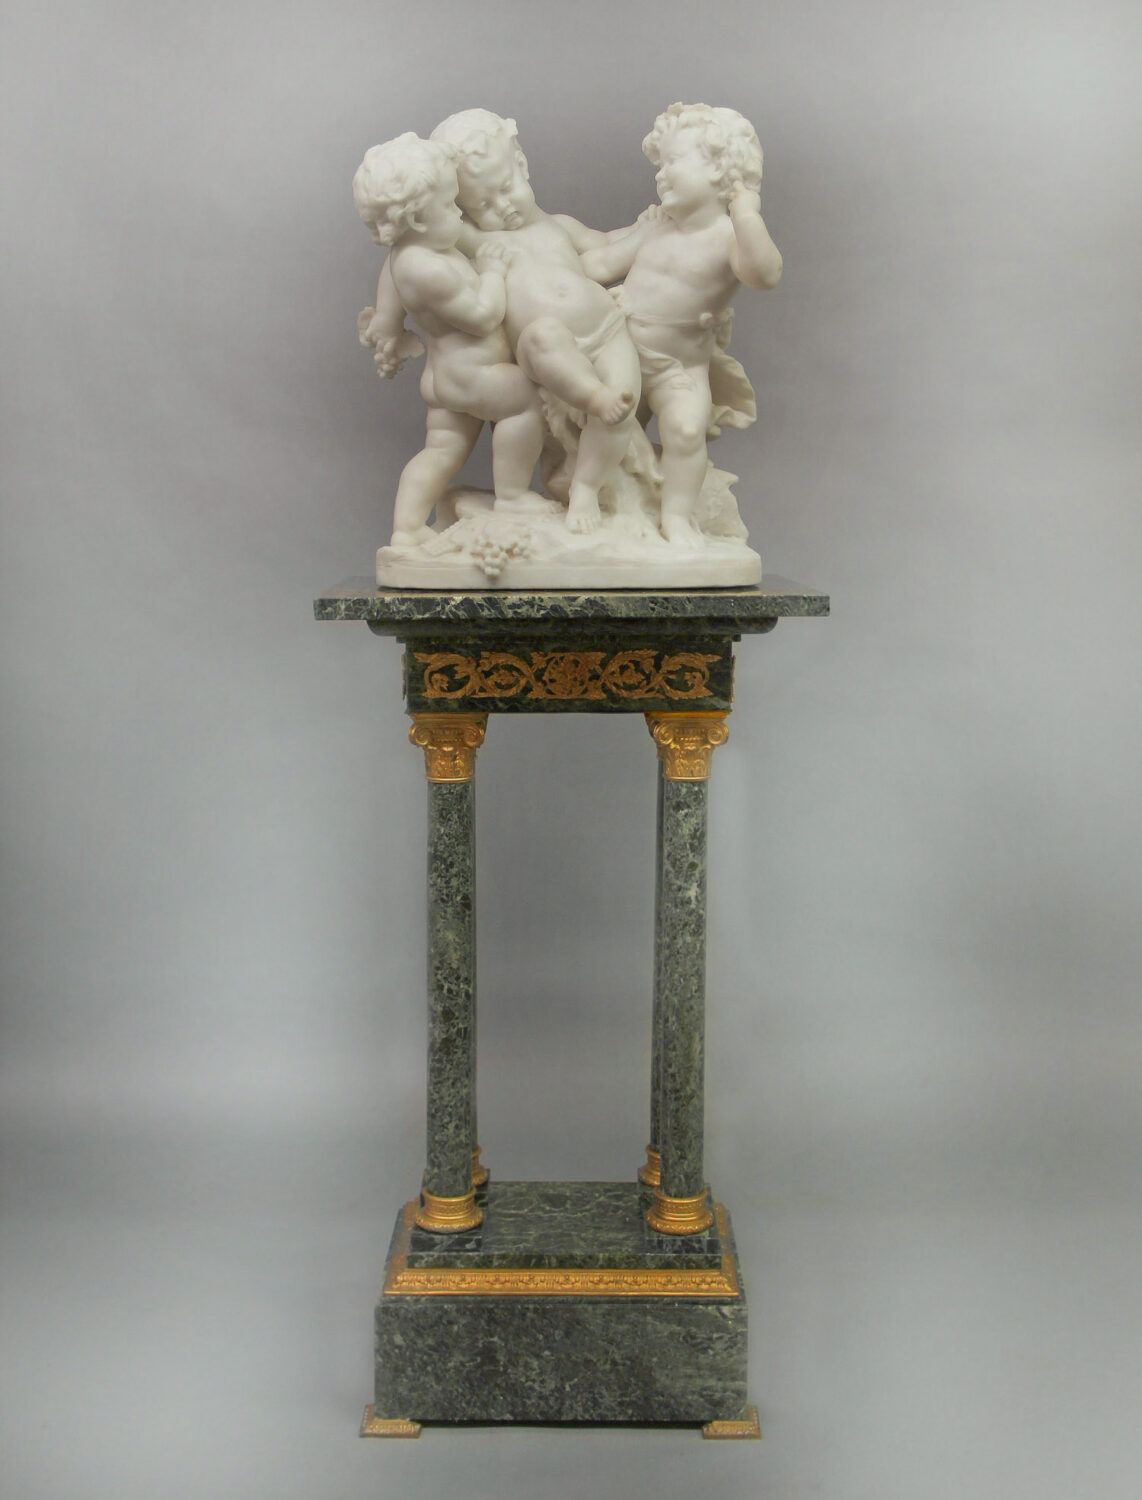 19th century Carrara Marble Figural group of Drunken Silenus seated on a tall and thin green and gold table.